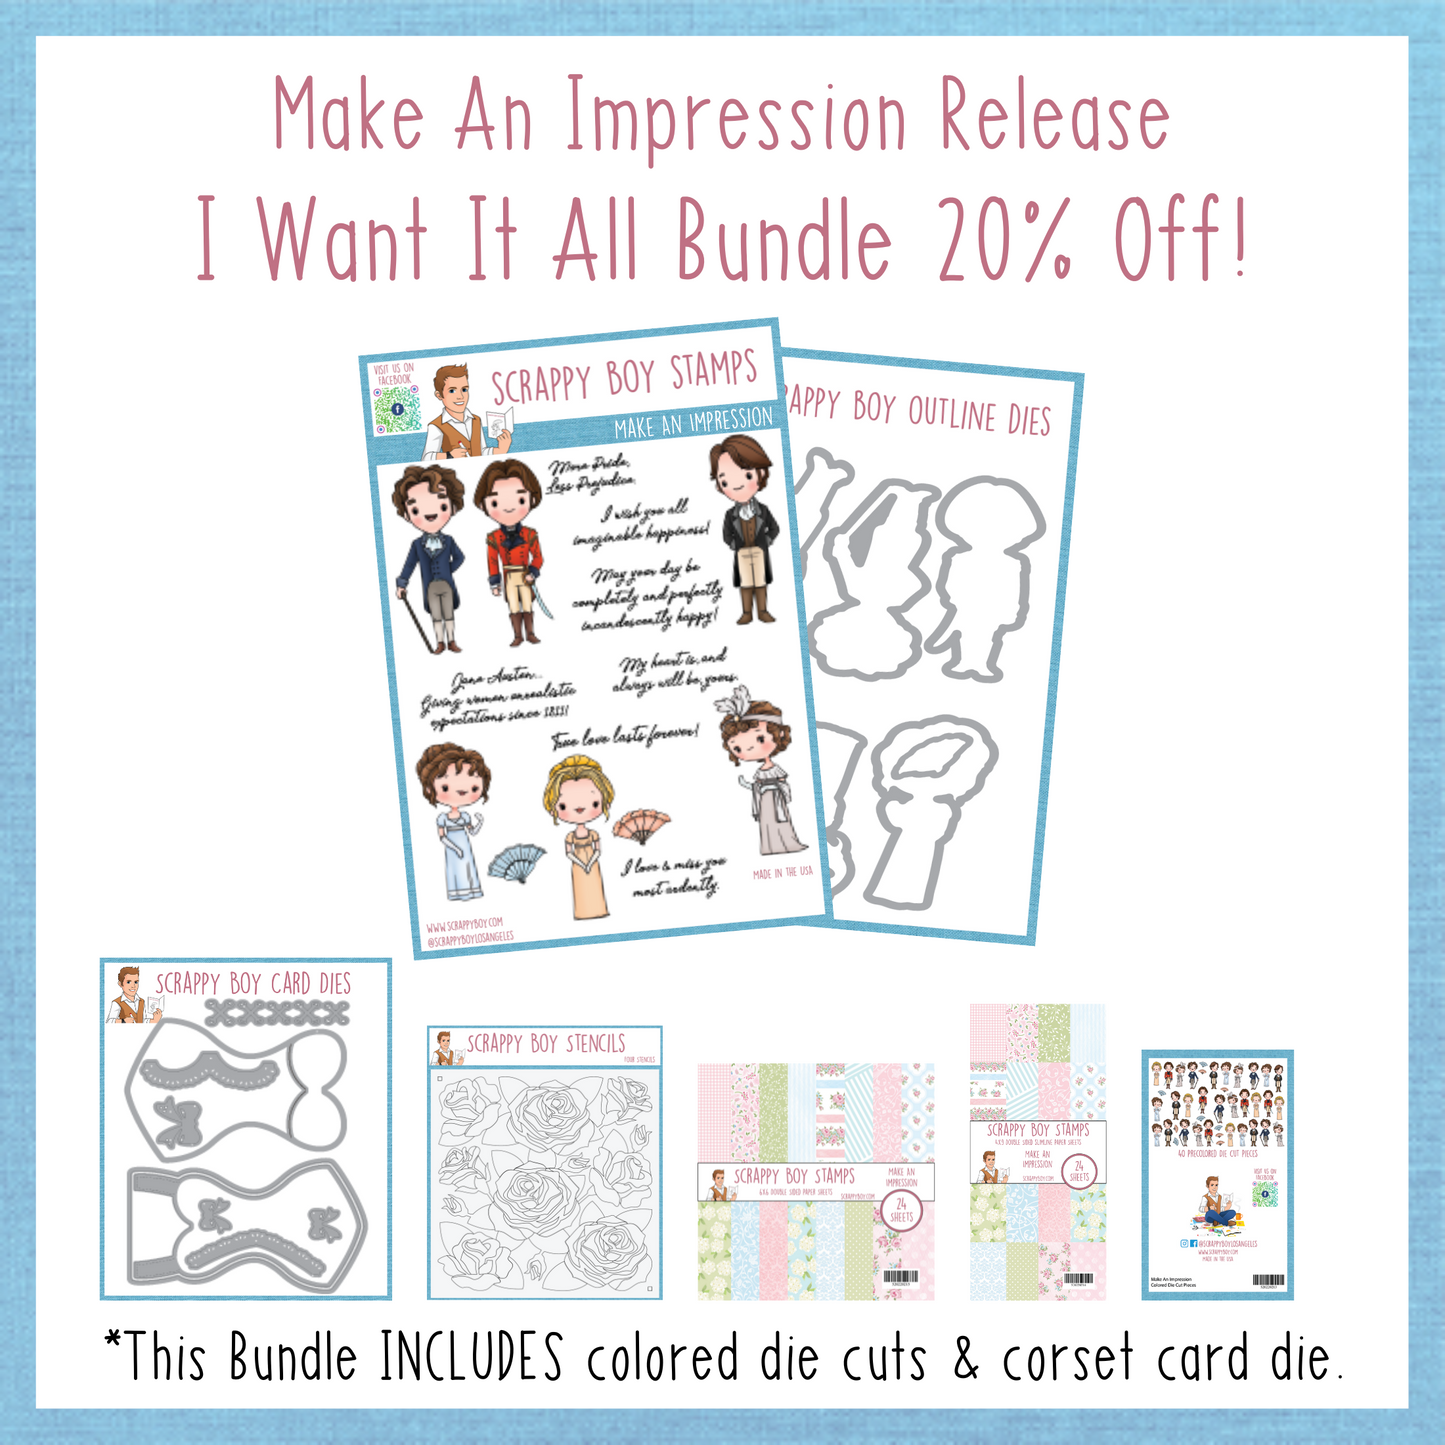 I Want It All Bundle - Make An Impression Release Scrappy Boy Stamps